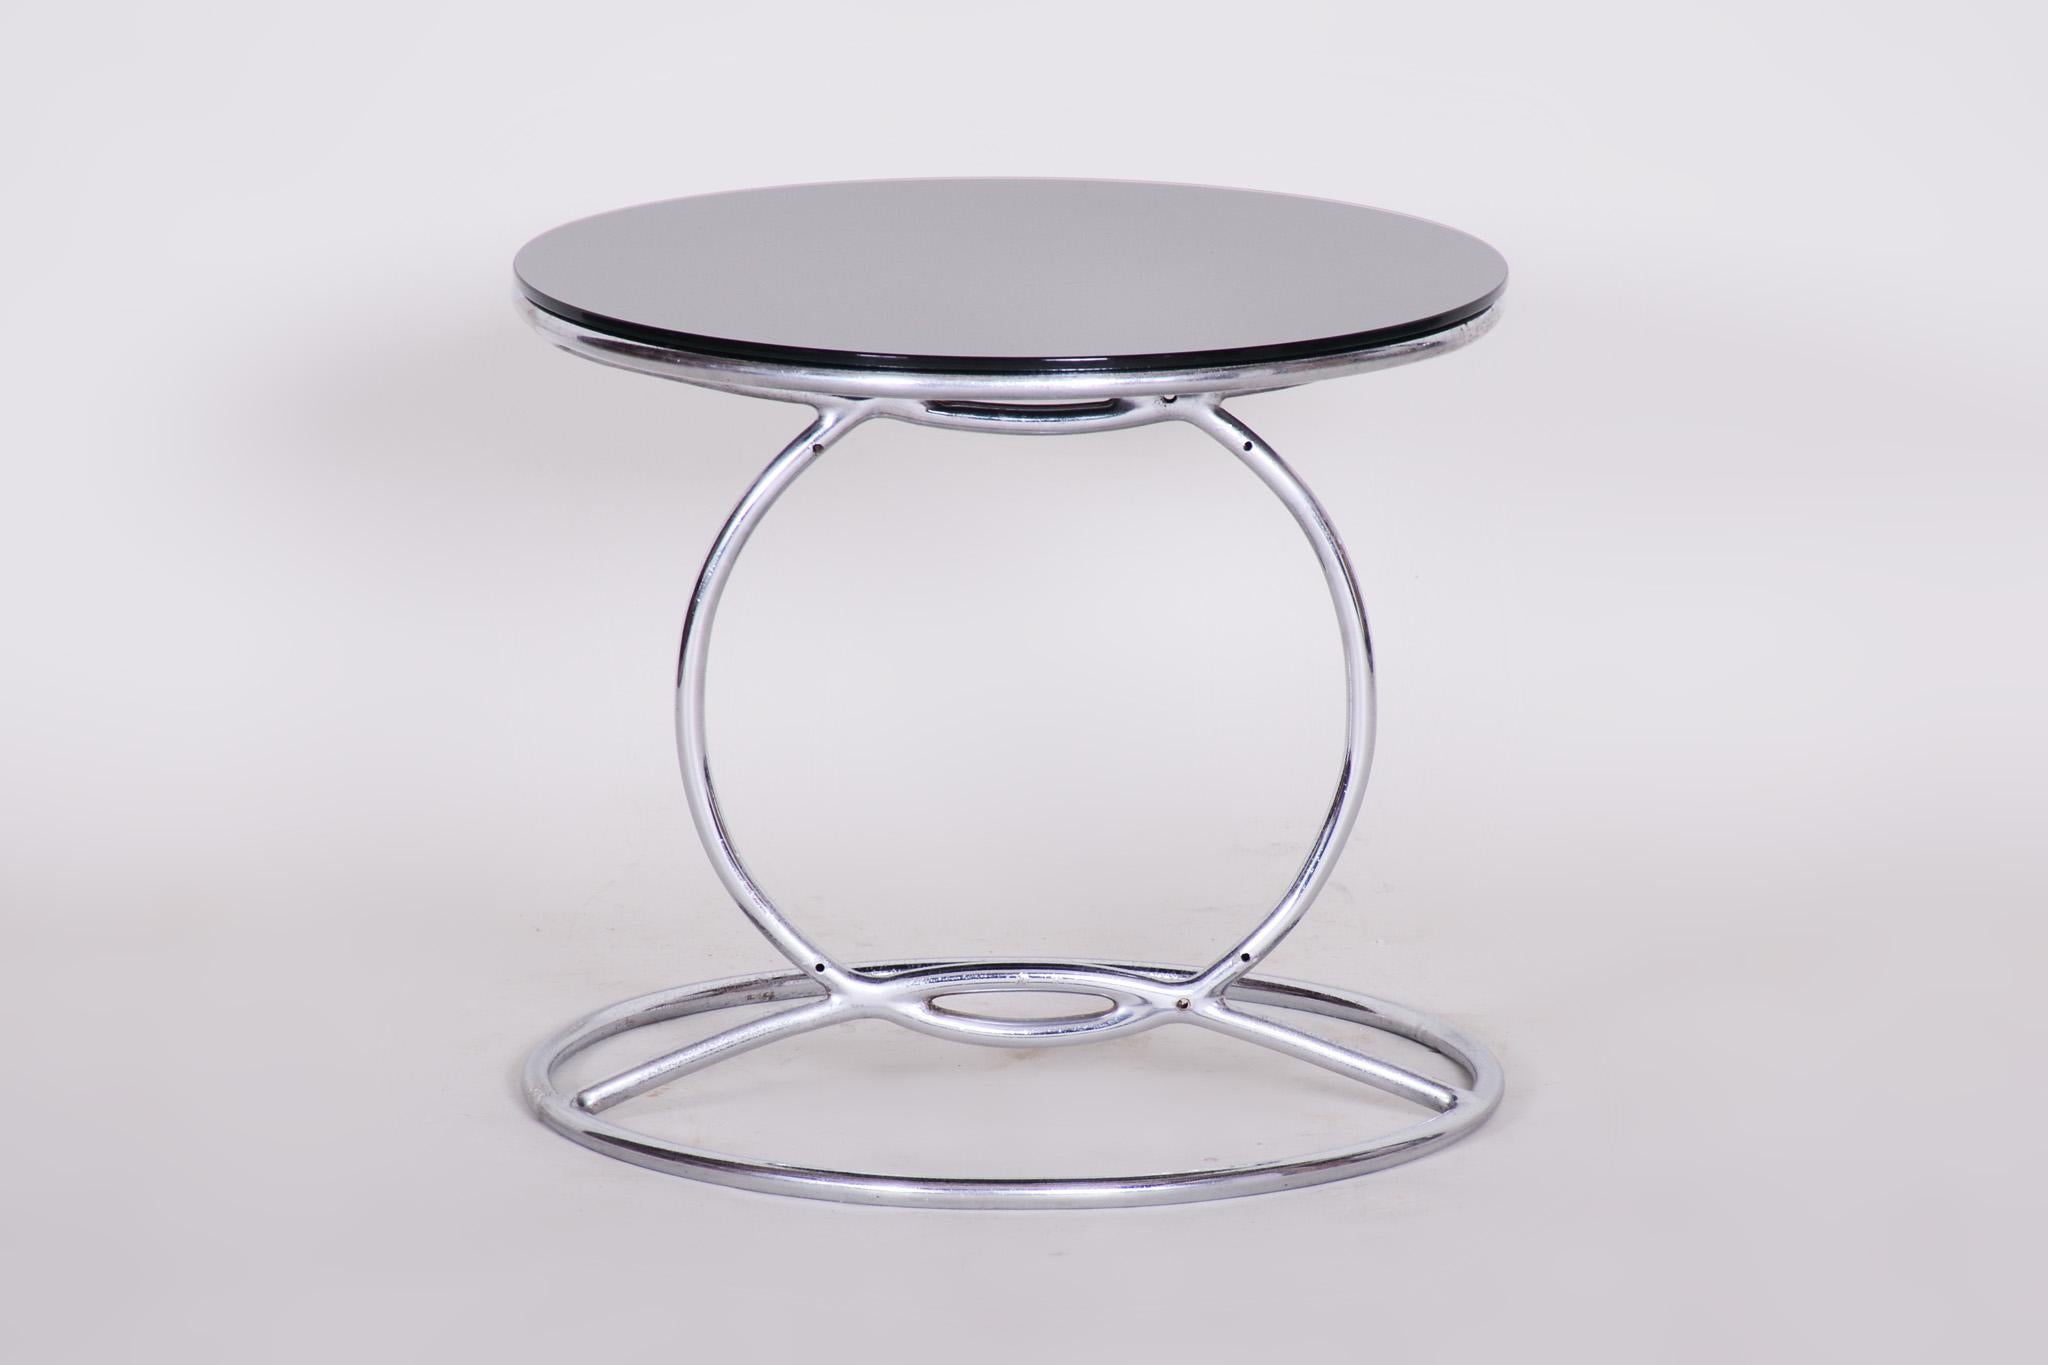 20th Century Unusual Chrome Bauhaus Round Small Table, 1950s, Perfect Condition, Black glass